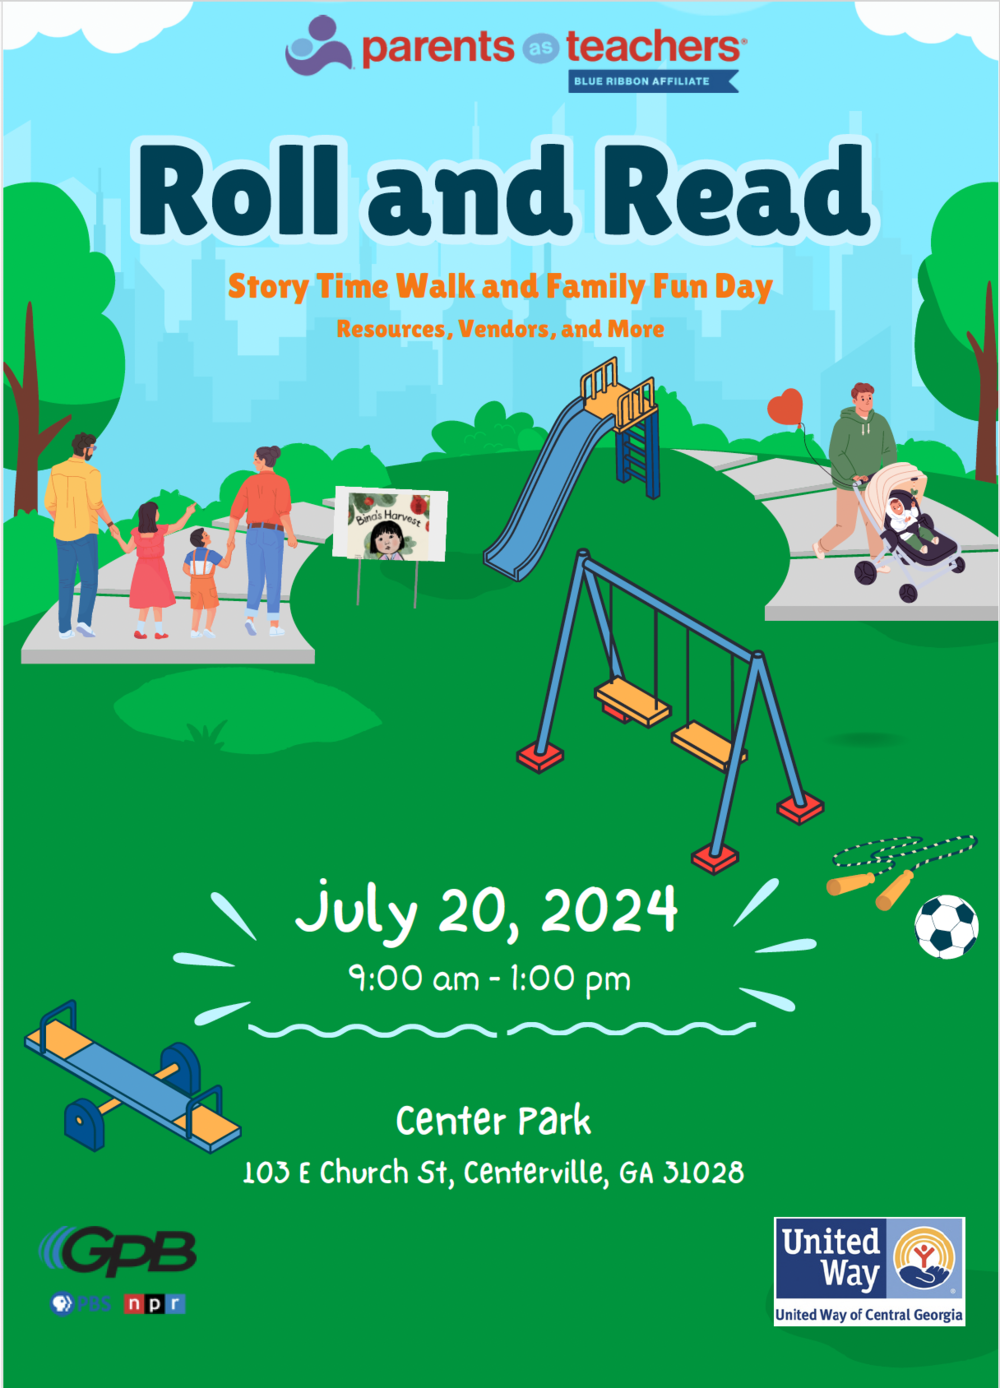 Parents as Teachers will host a Roll and Read event at Center Park in Centerville, GA, on July 20th.